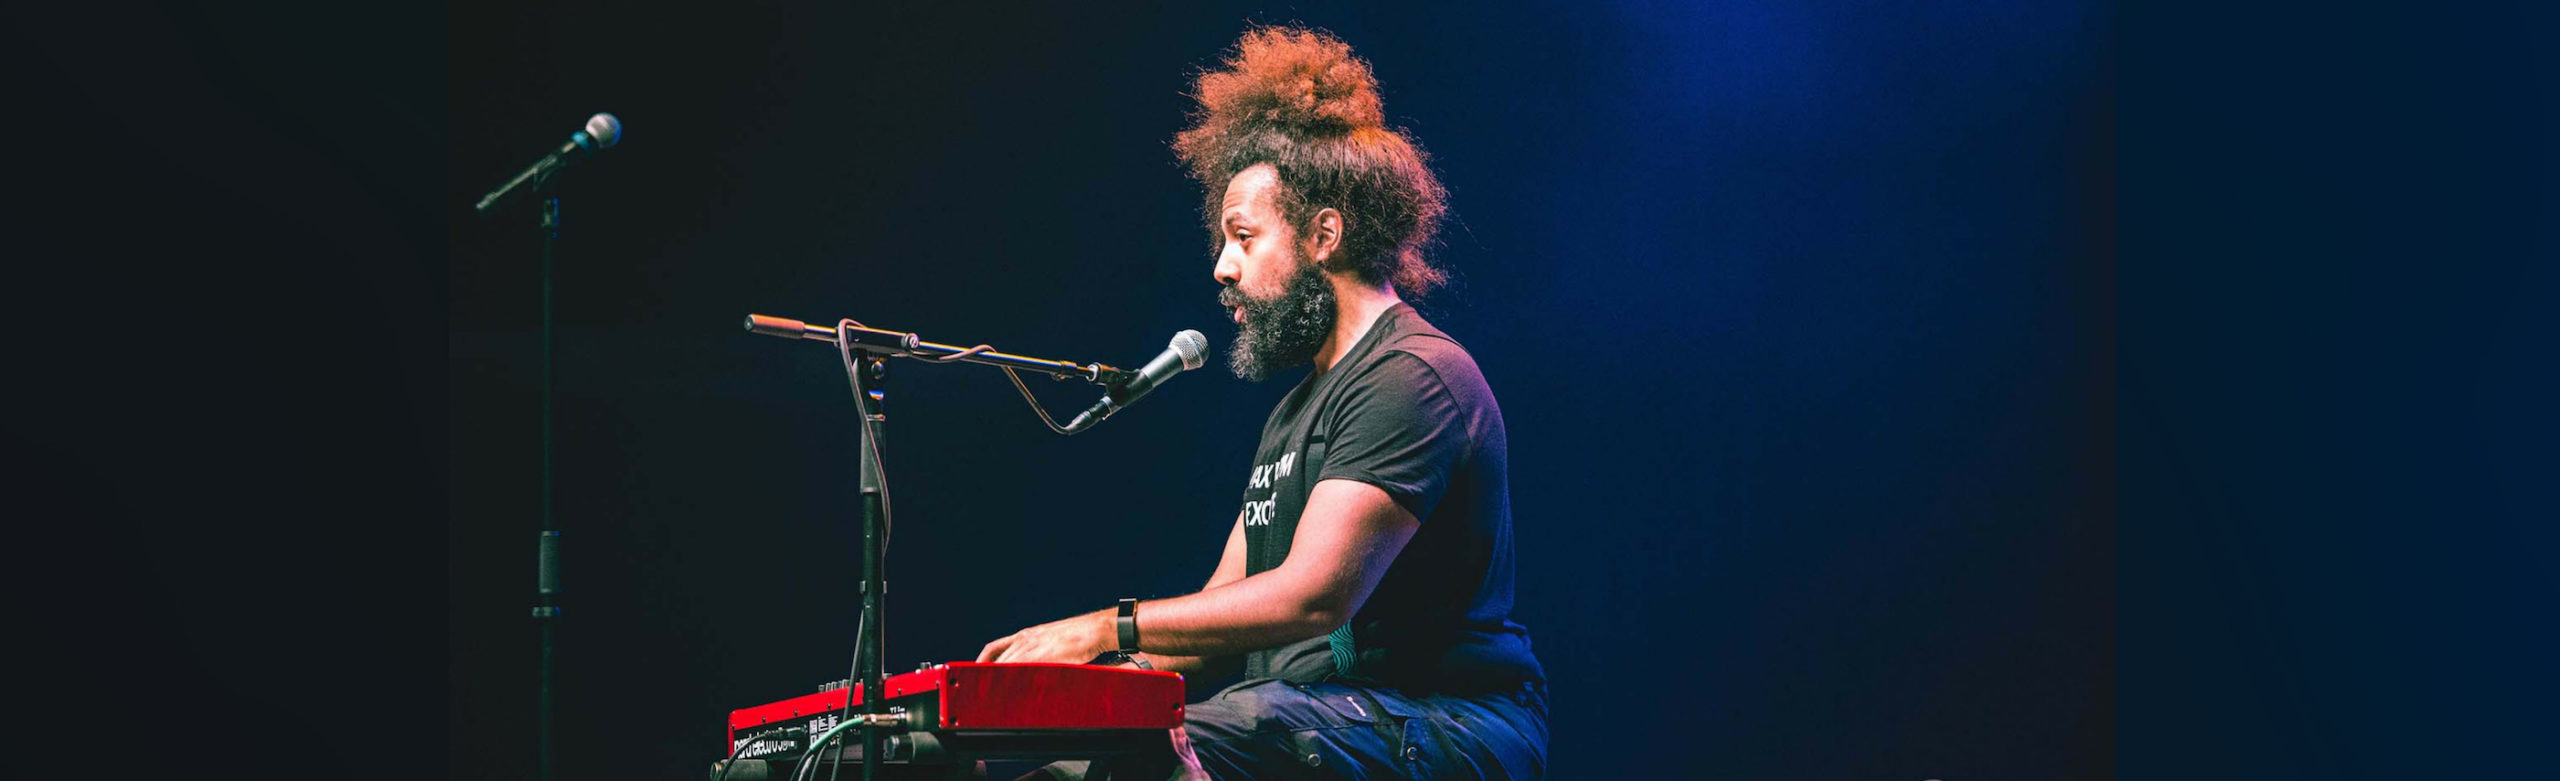 Comedian & Musician Reggie Watts Plans Return to Missoula for Annual Performance Image